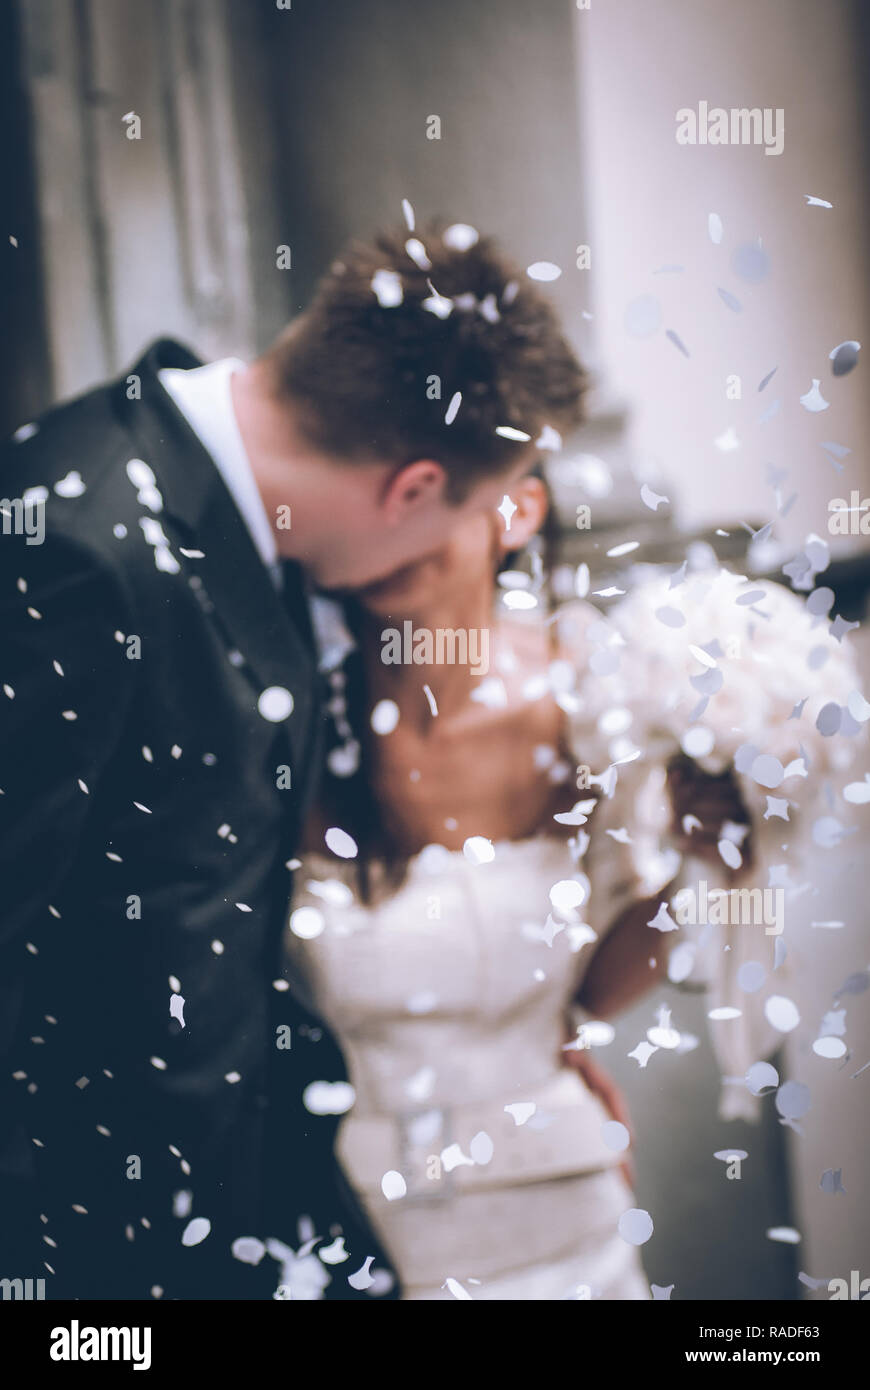 newlyweds they kiss - intentional defocused image - focus on confetti - sensory connections Stock Photo